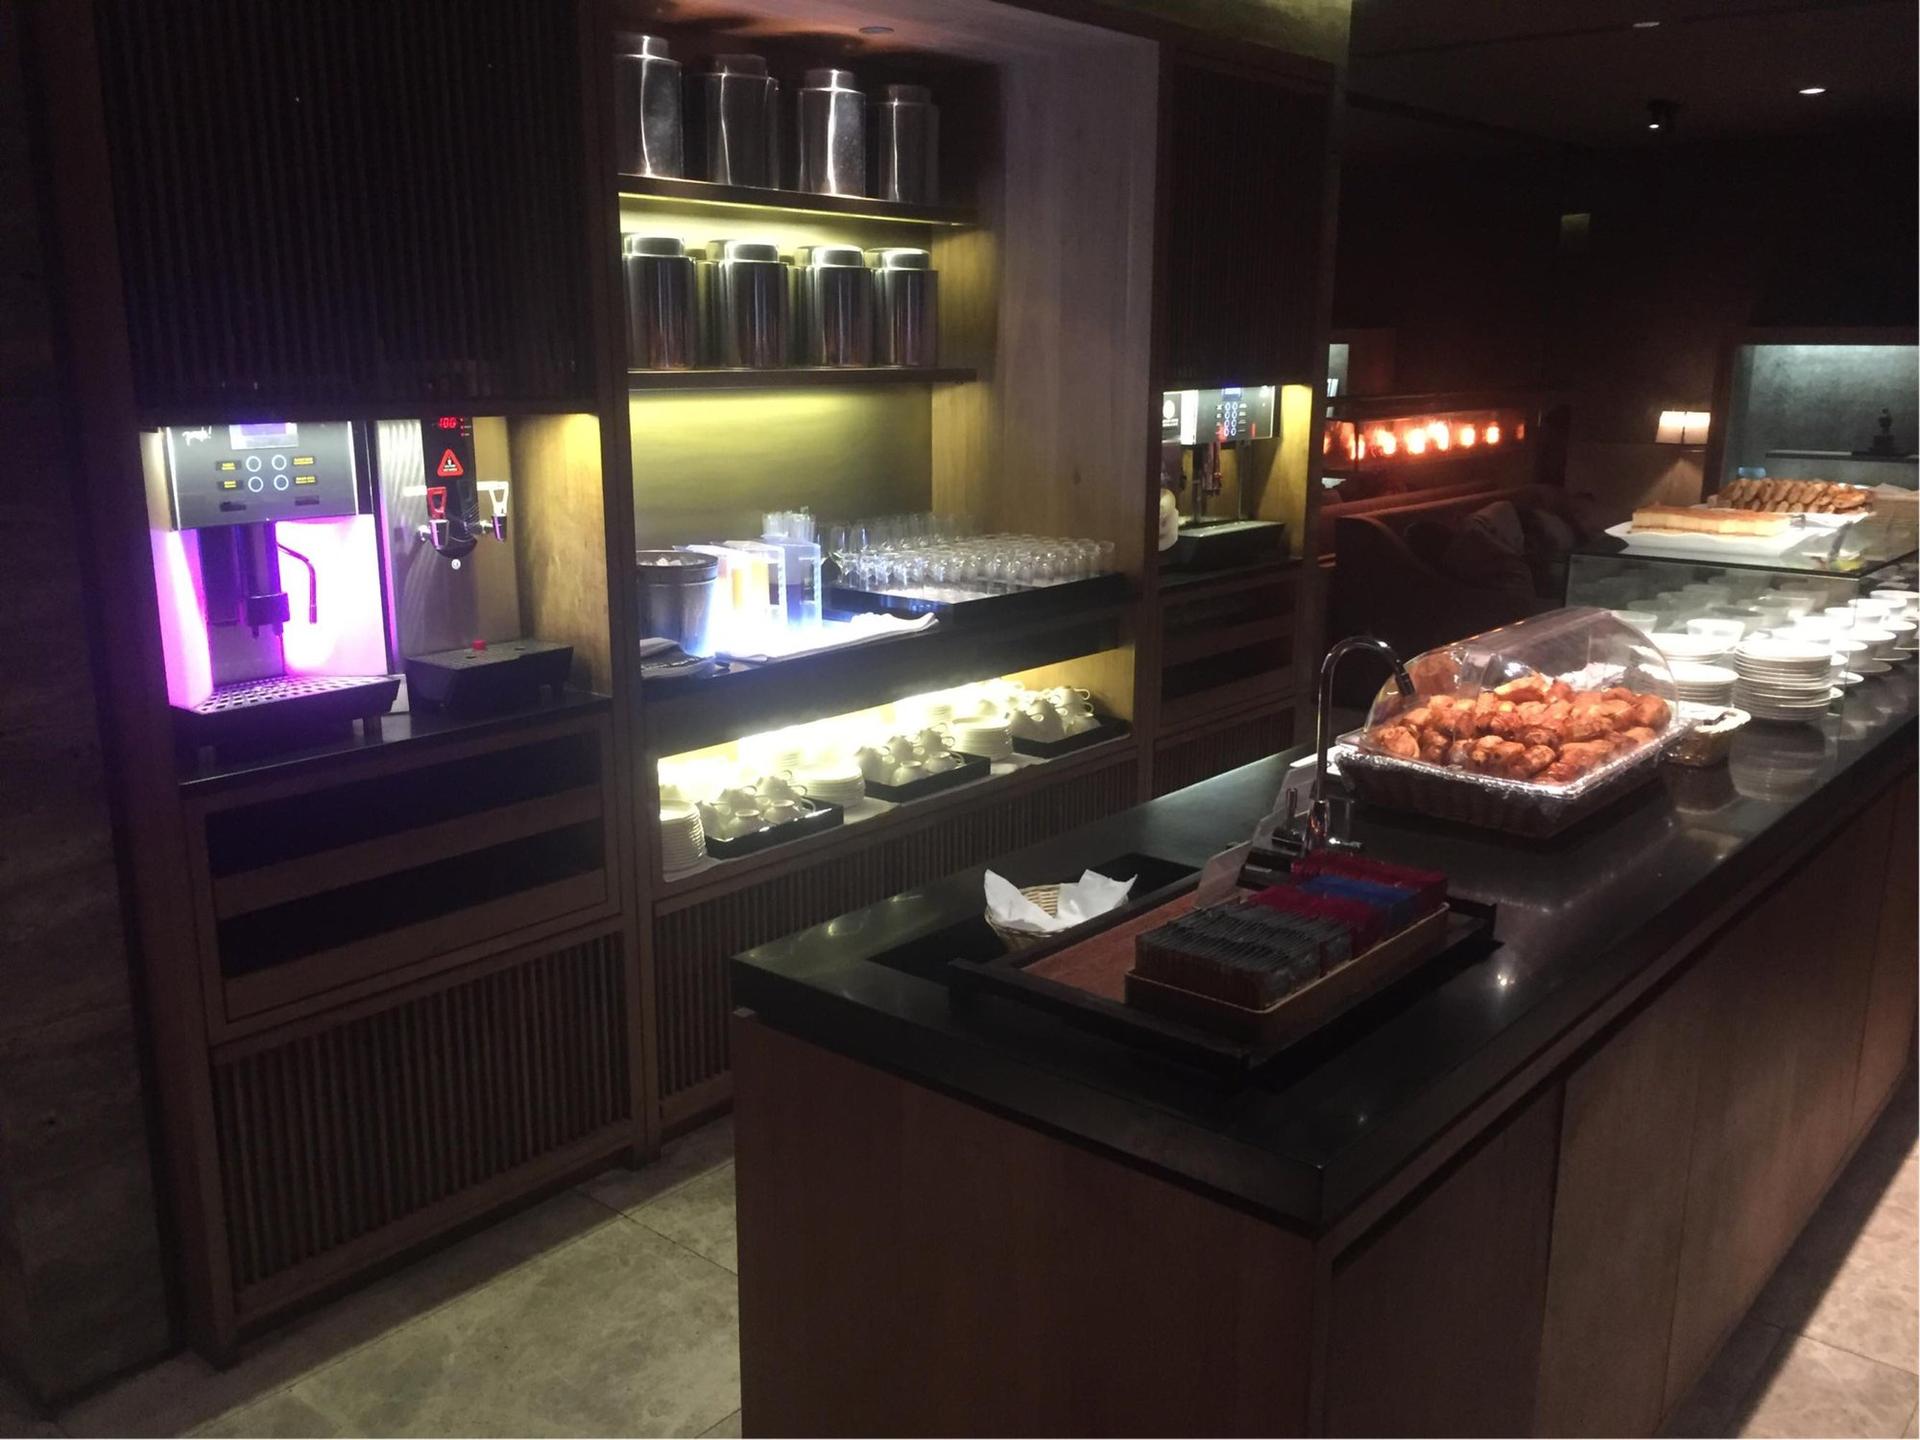 China Airlines Lounge (V1) image 40 of 44